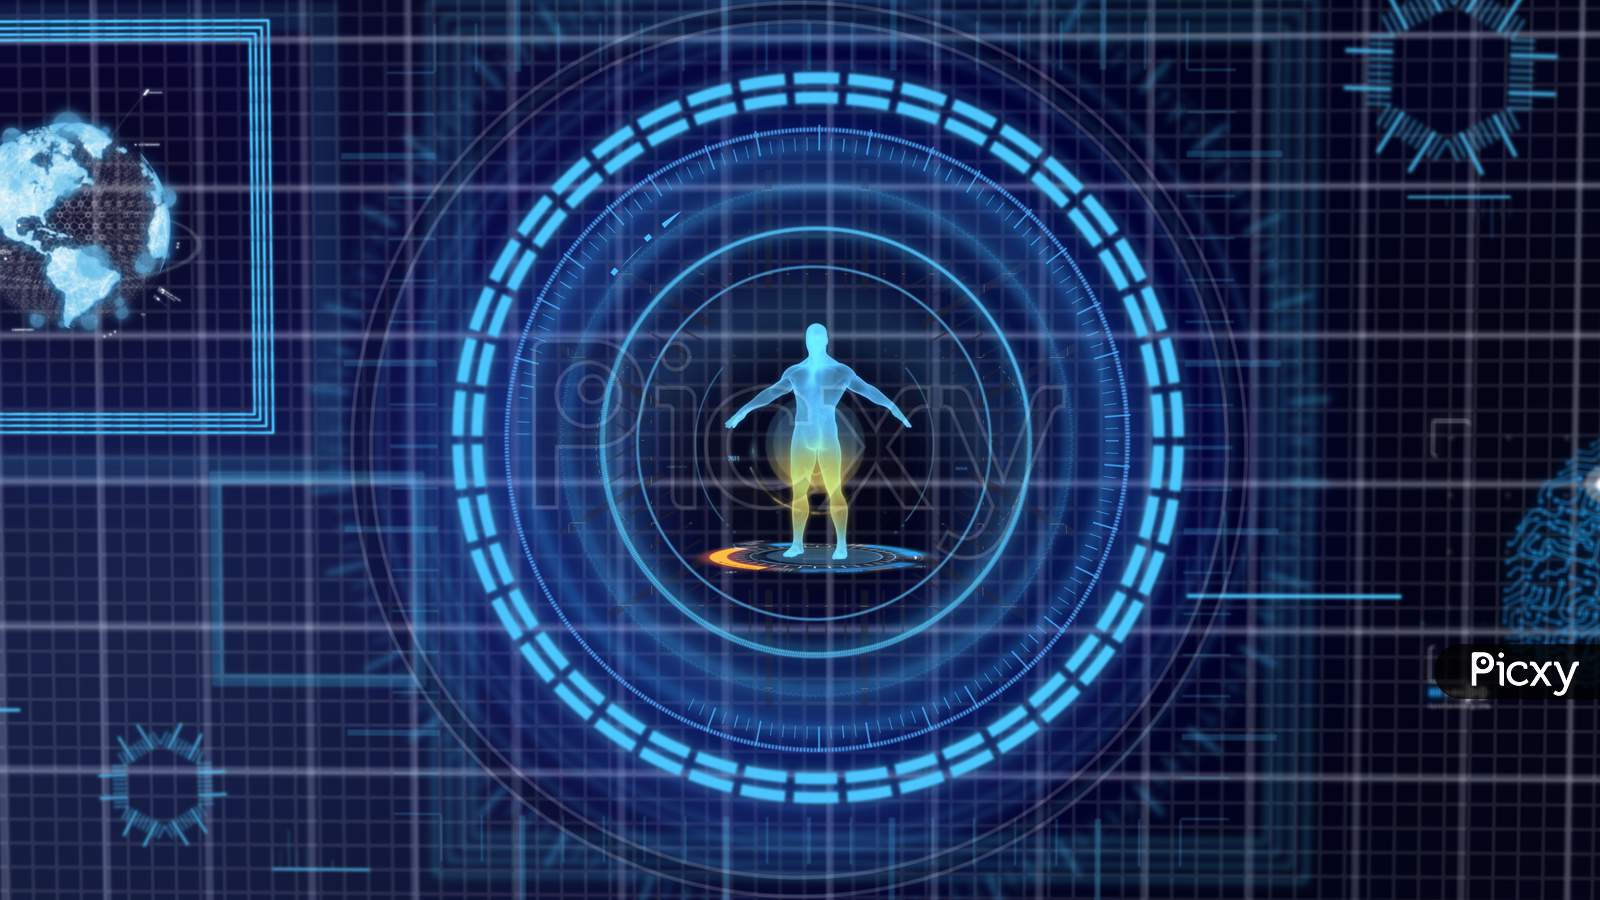 Futuristic Blue Hud Medicine Personal Data Screen Grid Display Background. Hologram Of Human Body And Organ. Health And Business Technology Concept. Digital Transformation. 3D Illustration Rendering